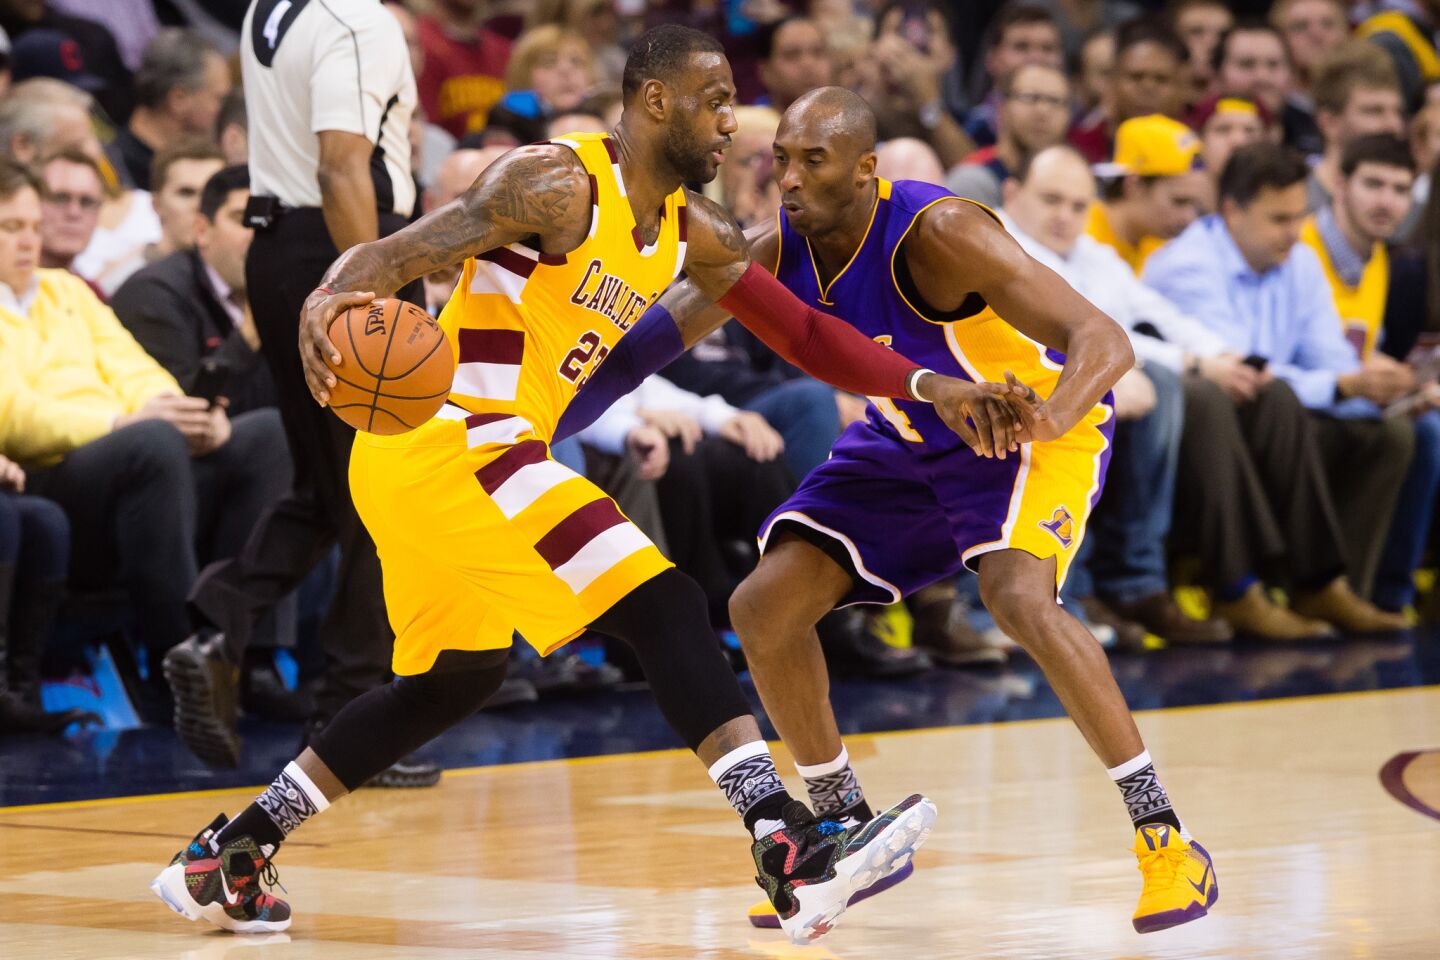 Cavaliers forward LeBron James is guarded by Kobe Bryant during the first half of a game on Feb. 10.